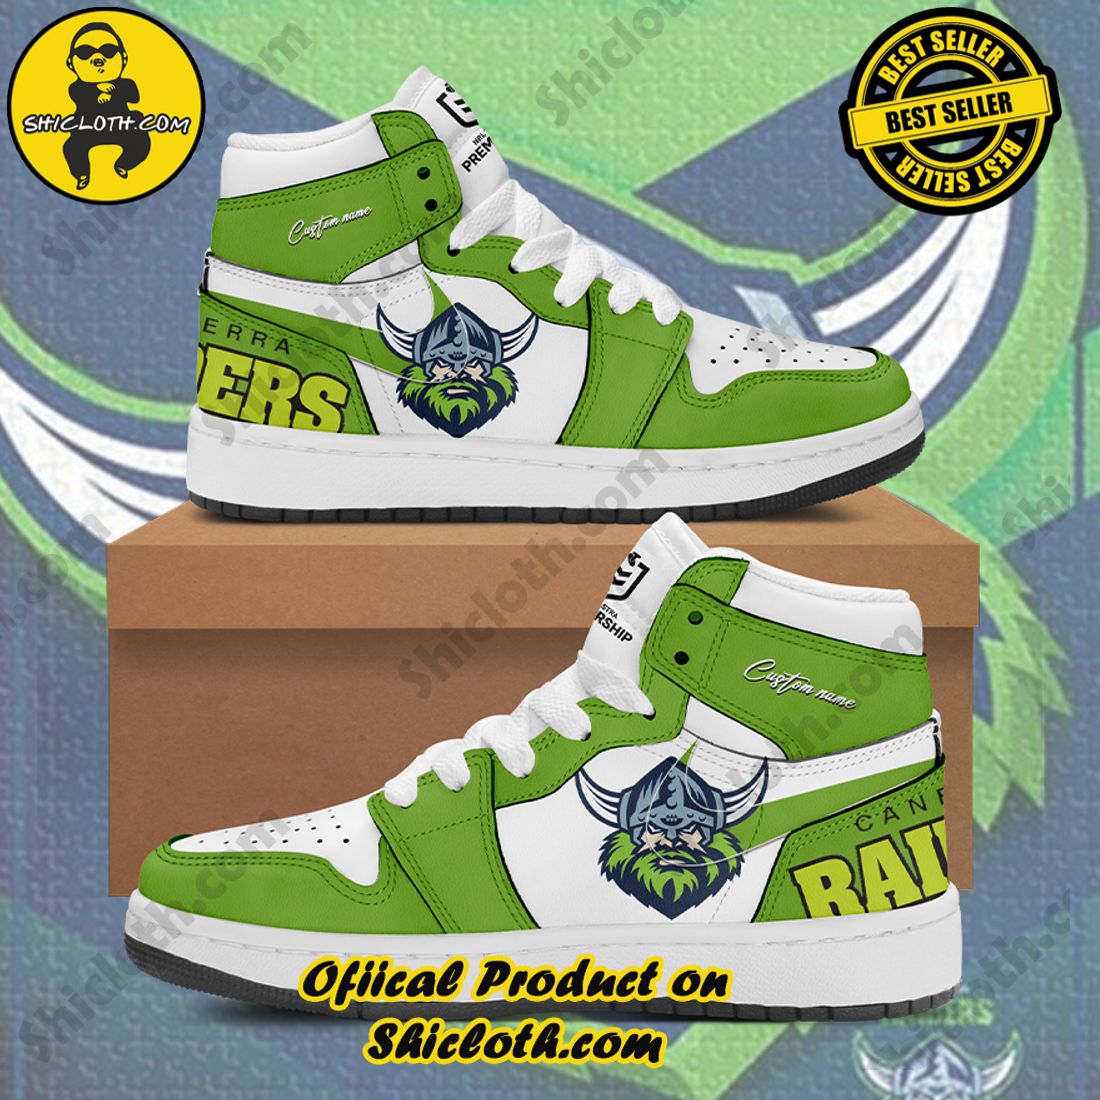 Personalized NFL Canberra Raiders Nike Air Jordan 1 Shoes - Shicloth